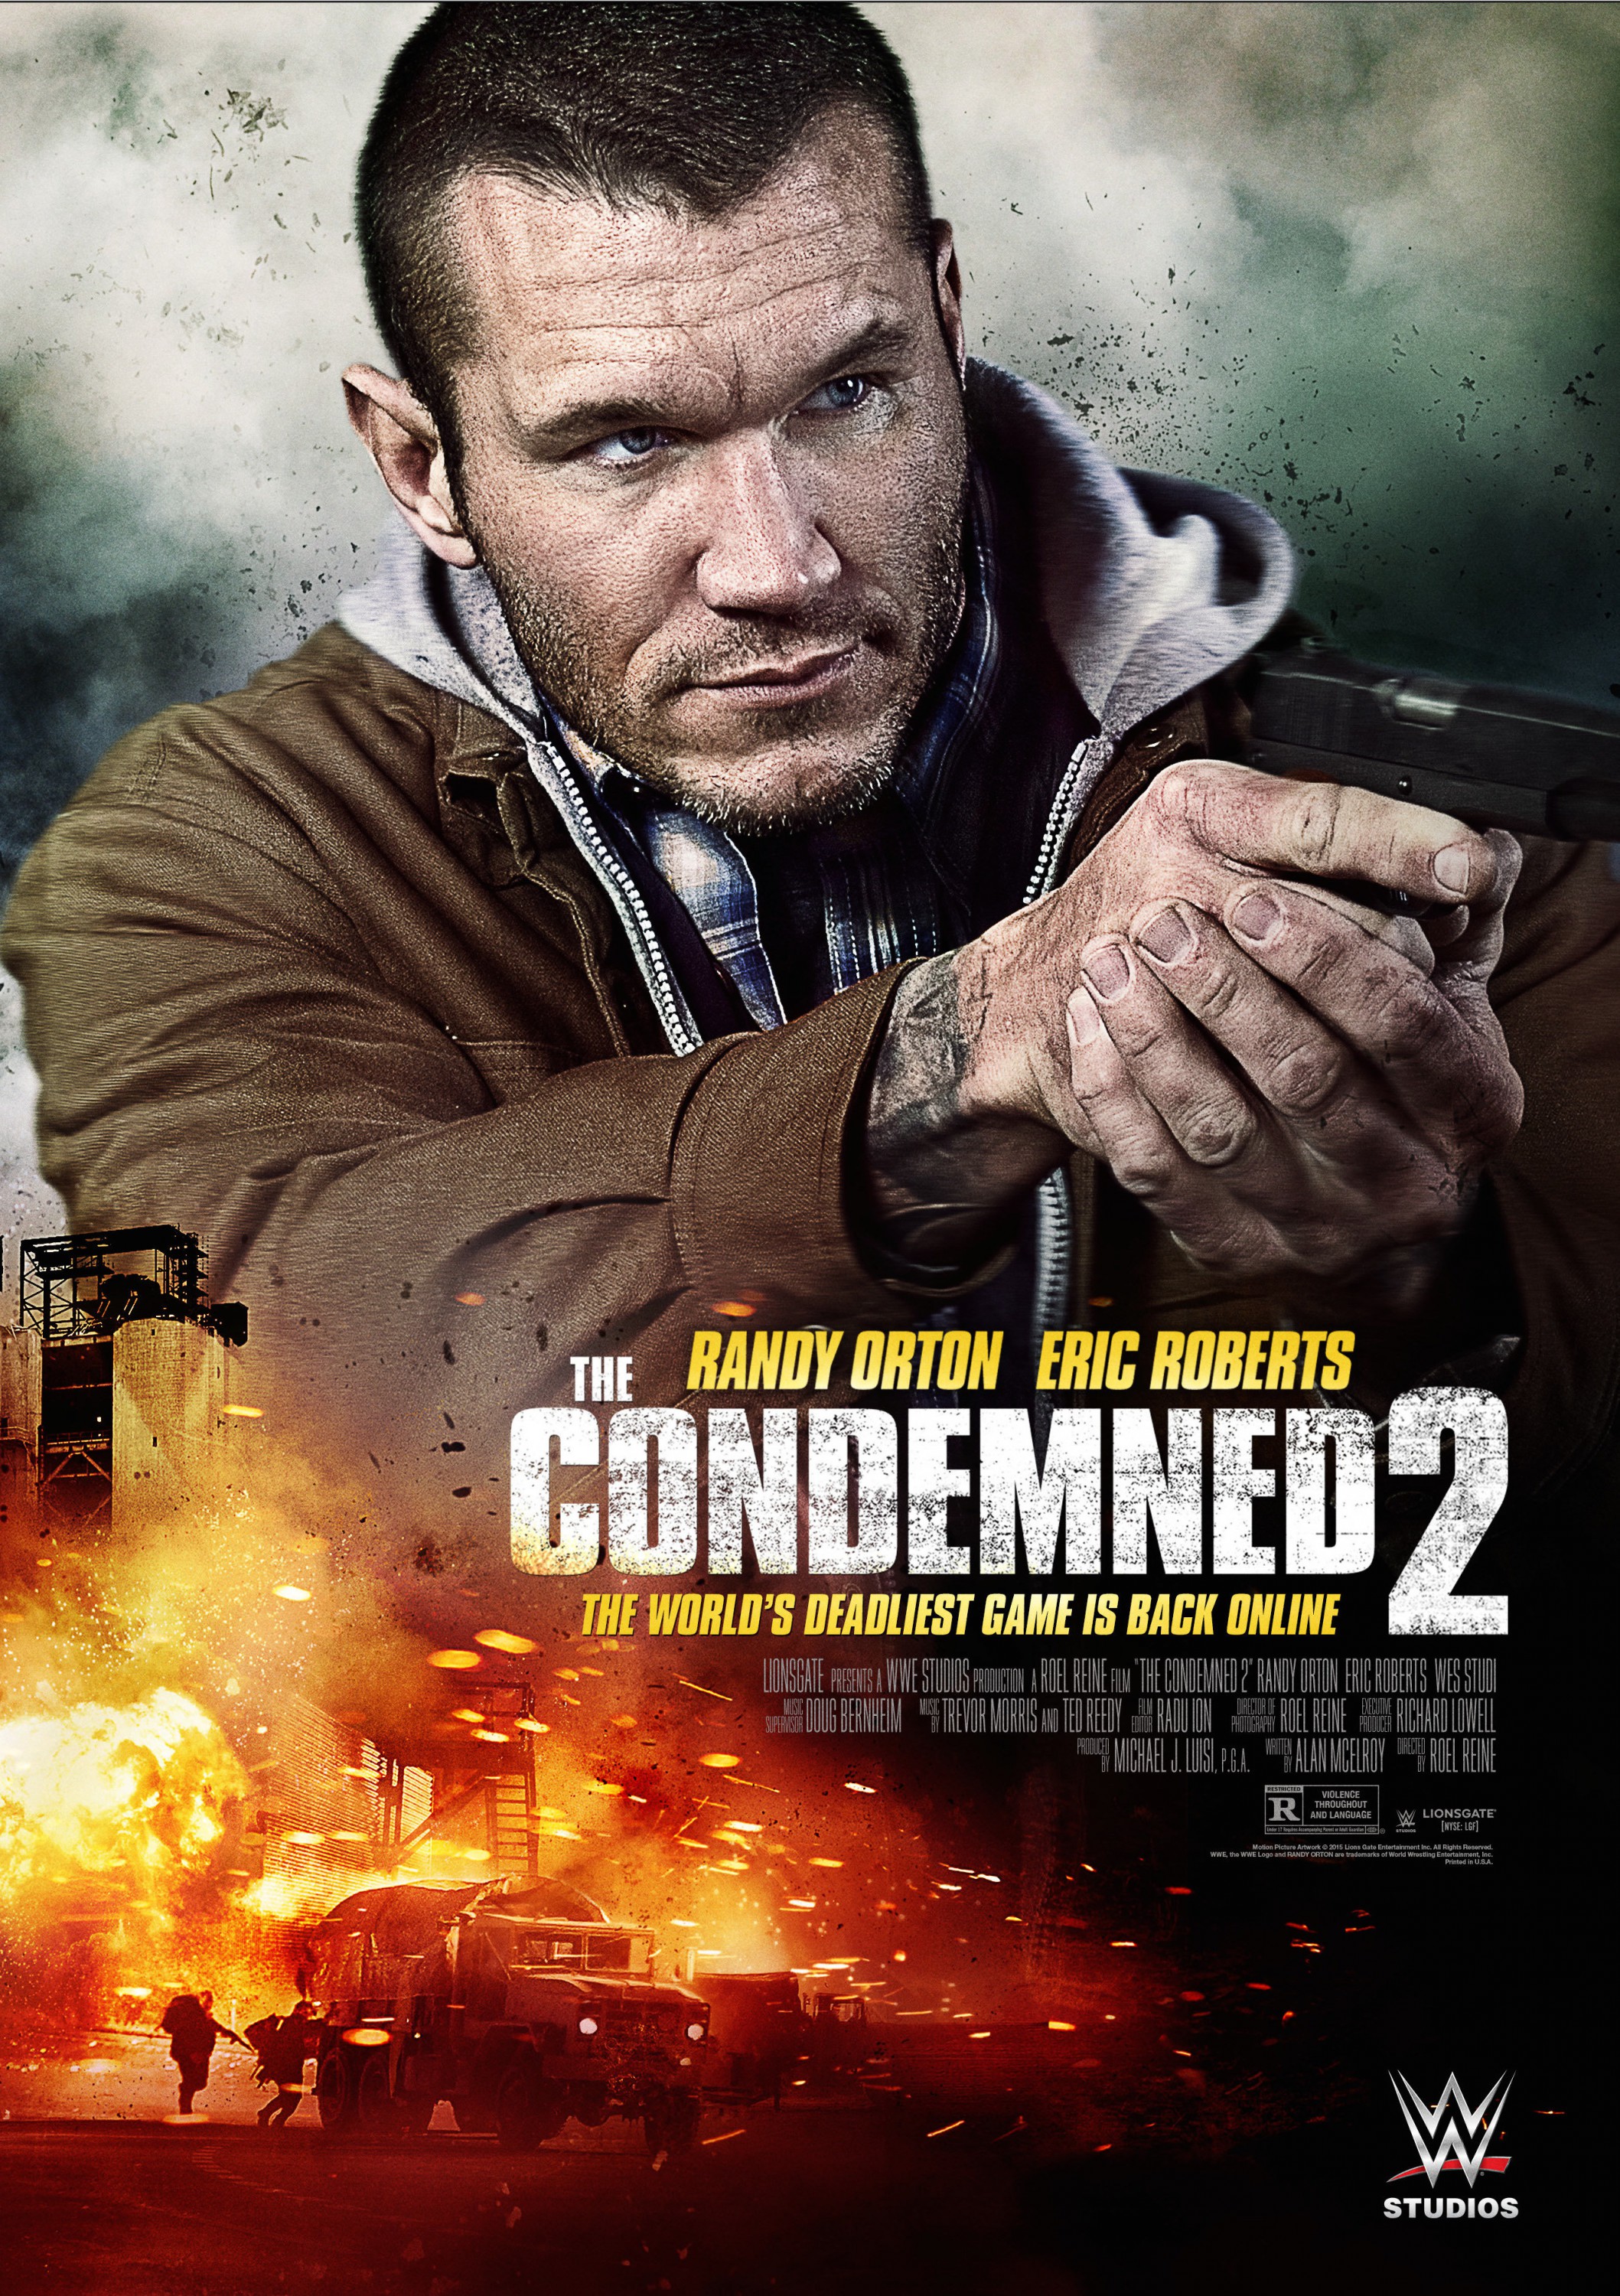 Mega Sized Movie Poster Image for The Condemned 2 